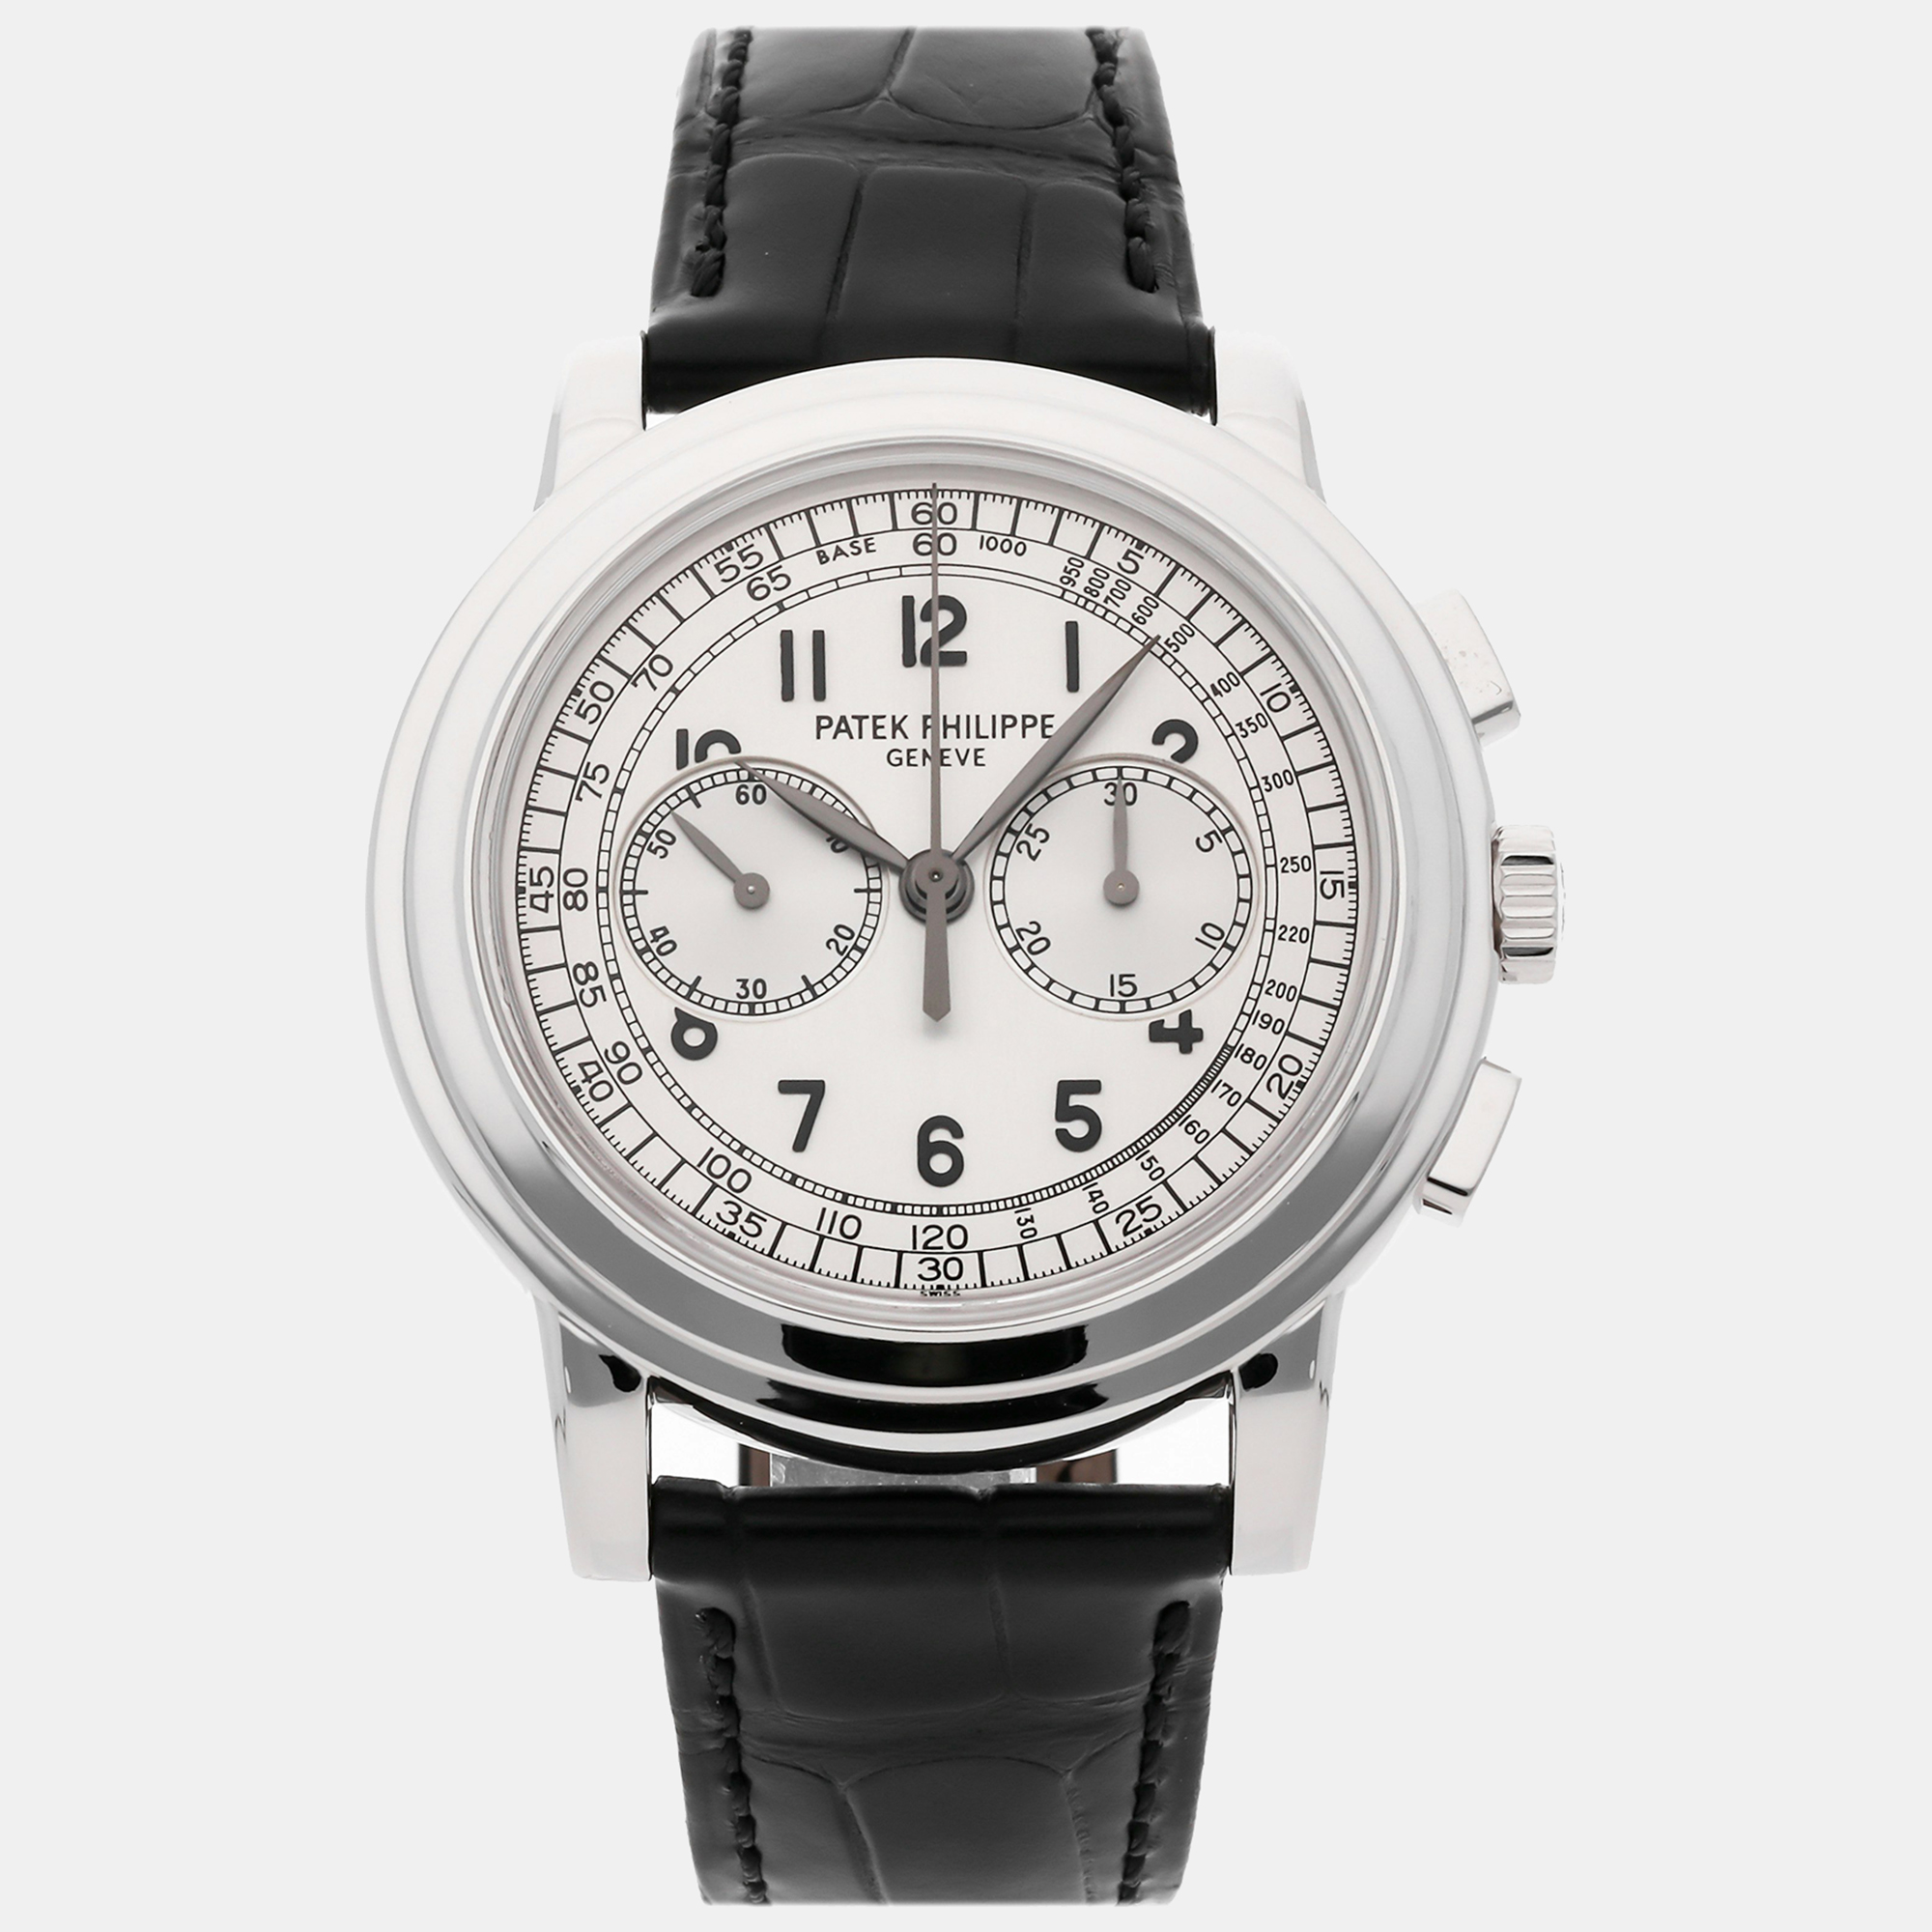 Pre-owned Patek Philippe Silver 18k White Gold Complications 5070g-001 Manual Winding Men's Wristwatch 42 Mm